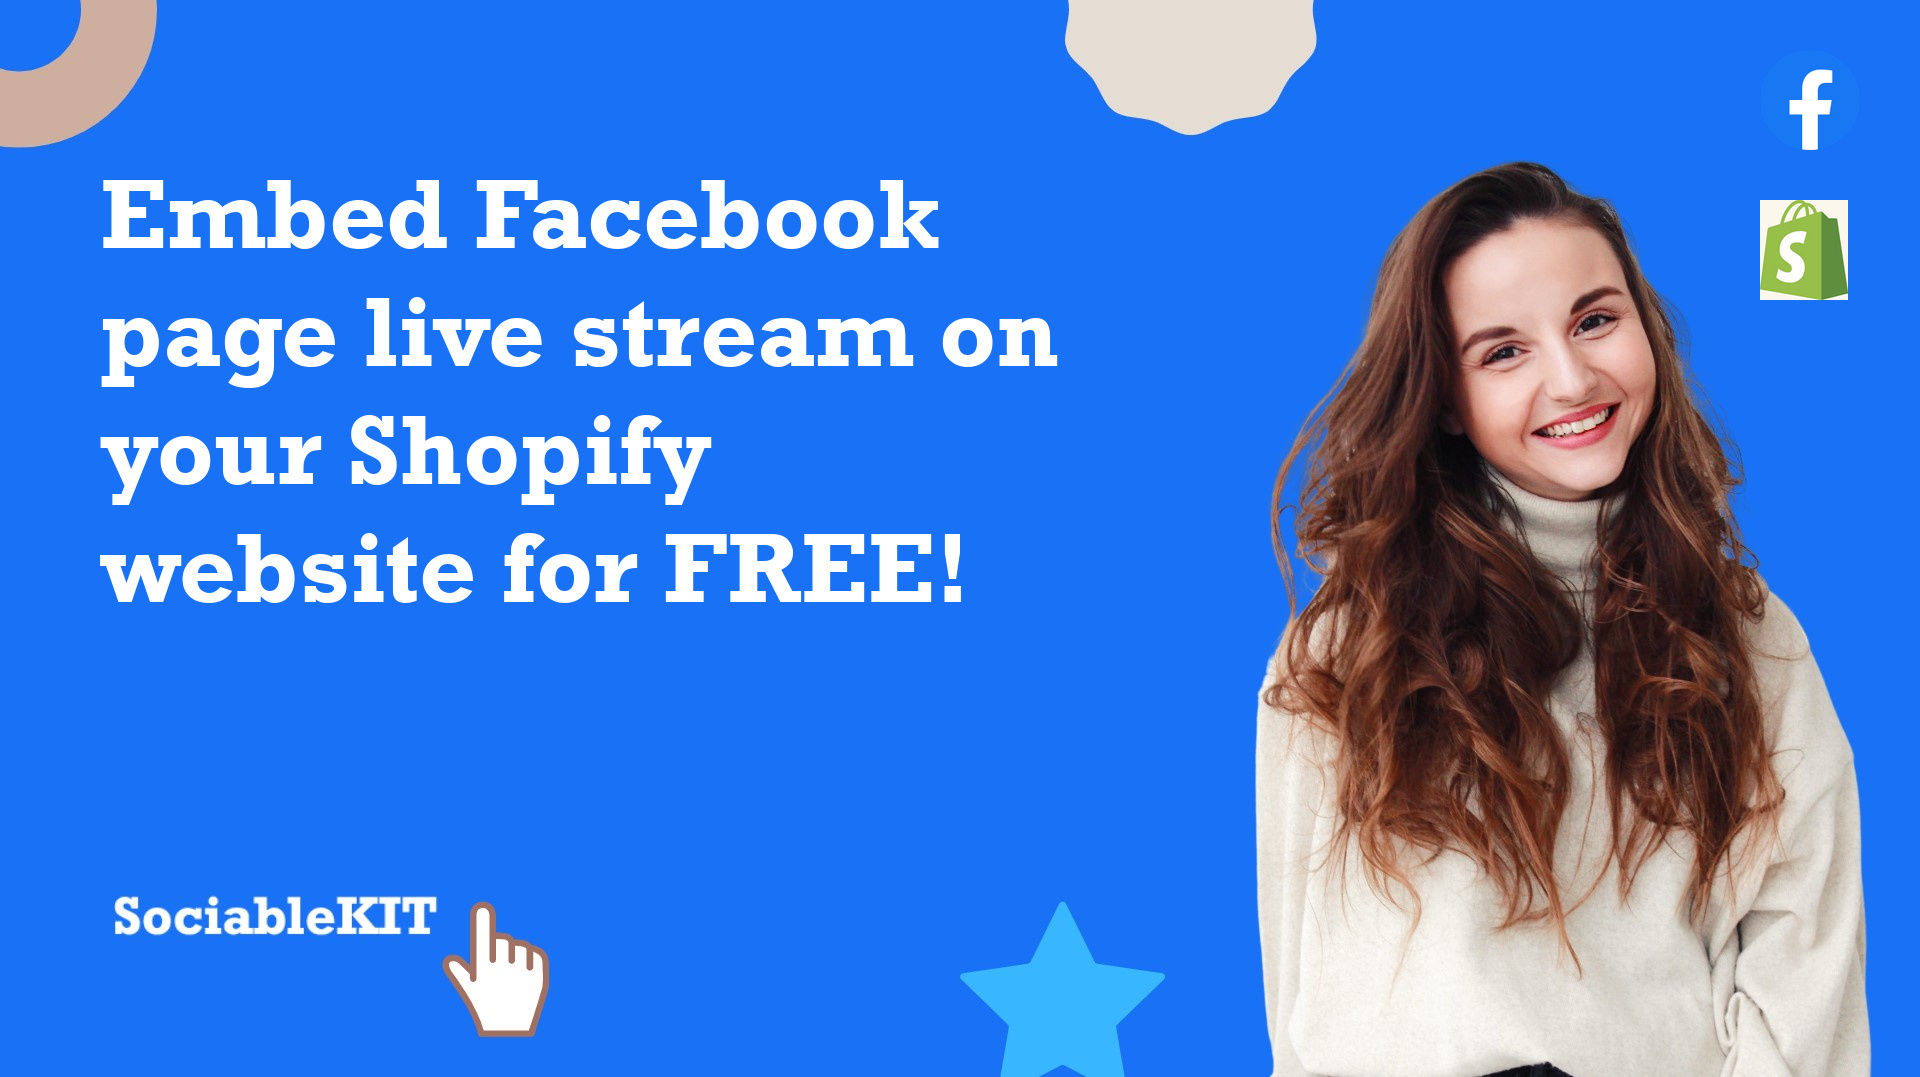 How to embed Facebook page live stream on your Shopify website for FREE?